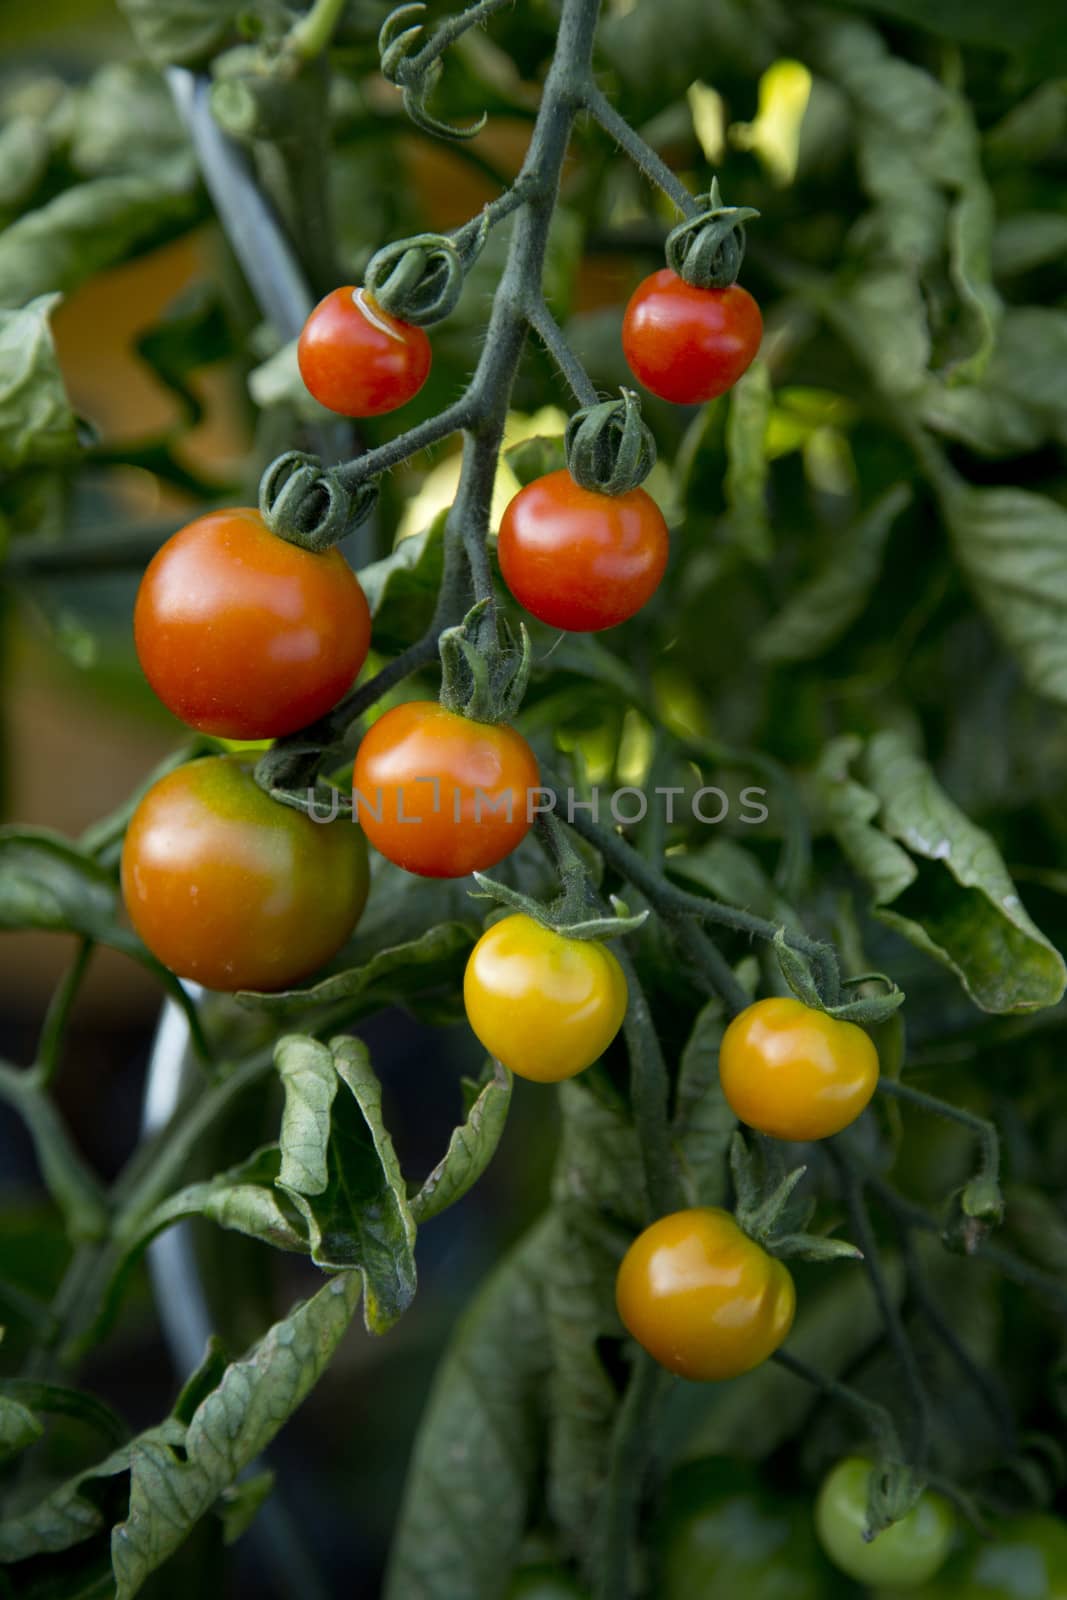 Bunch of red tomatoes in a garden